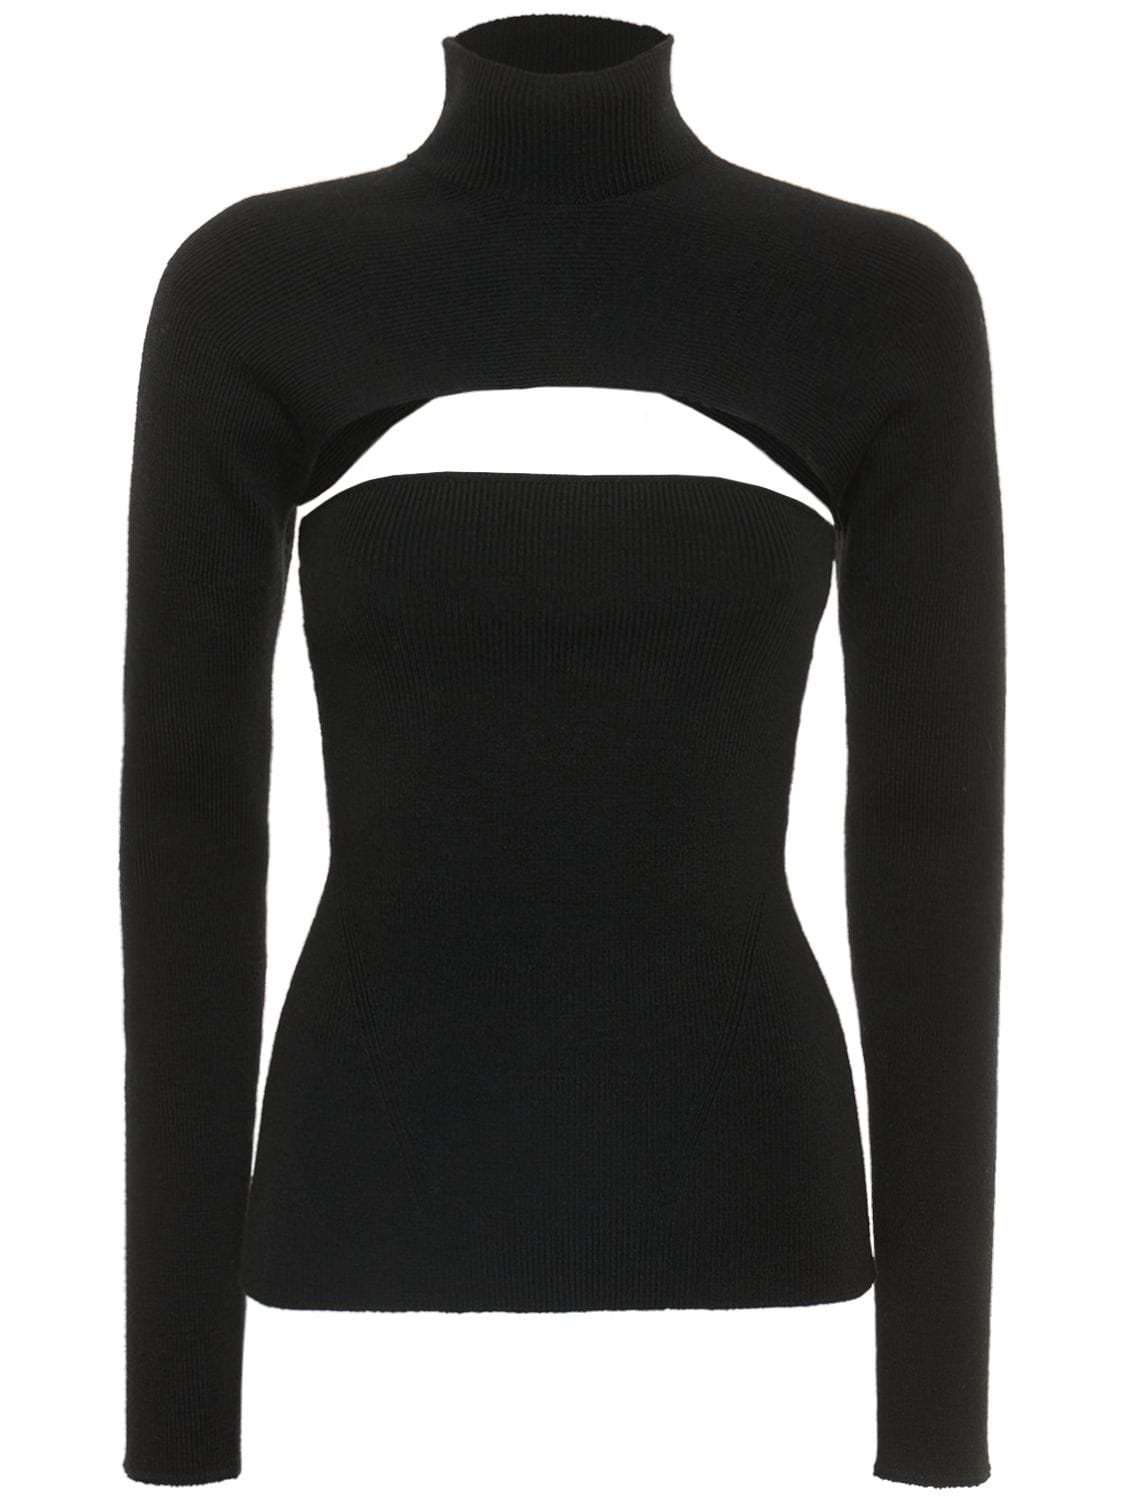 TOM FORD Two-piece Ribbed Wool Knit Sweater